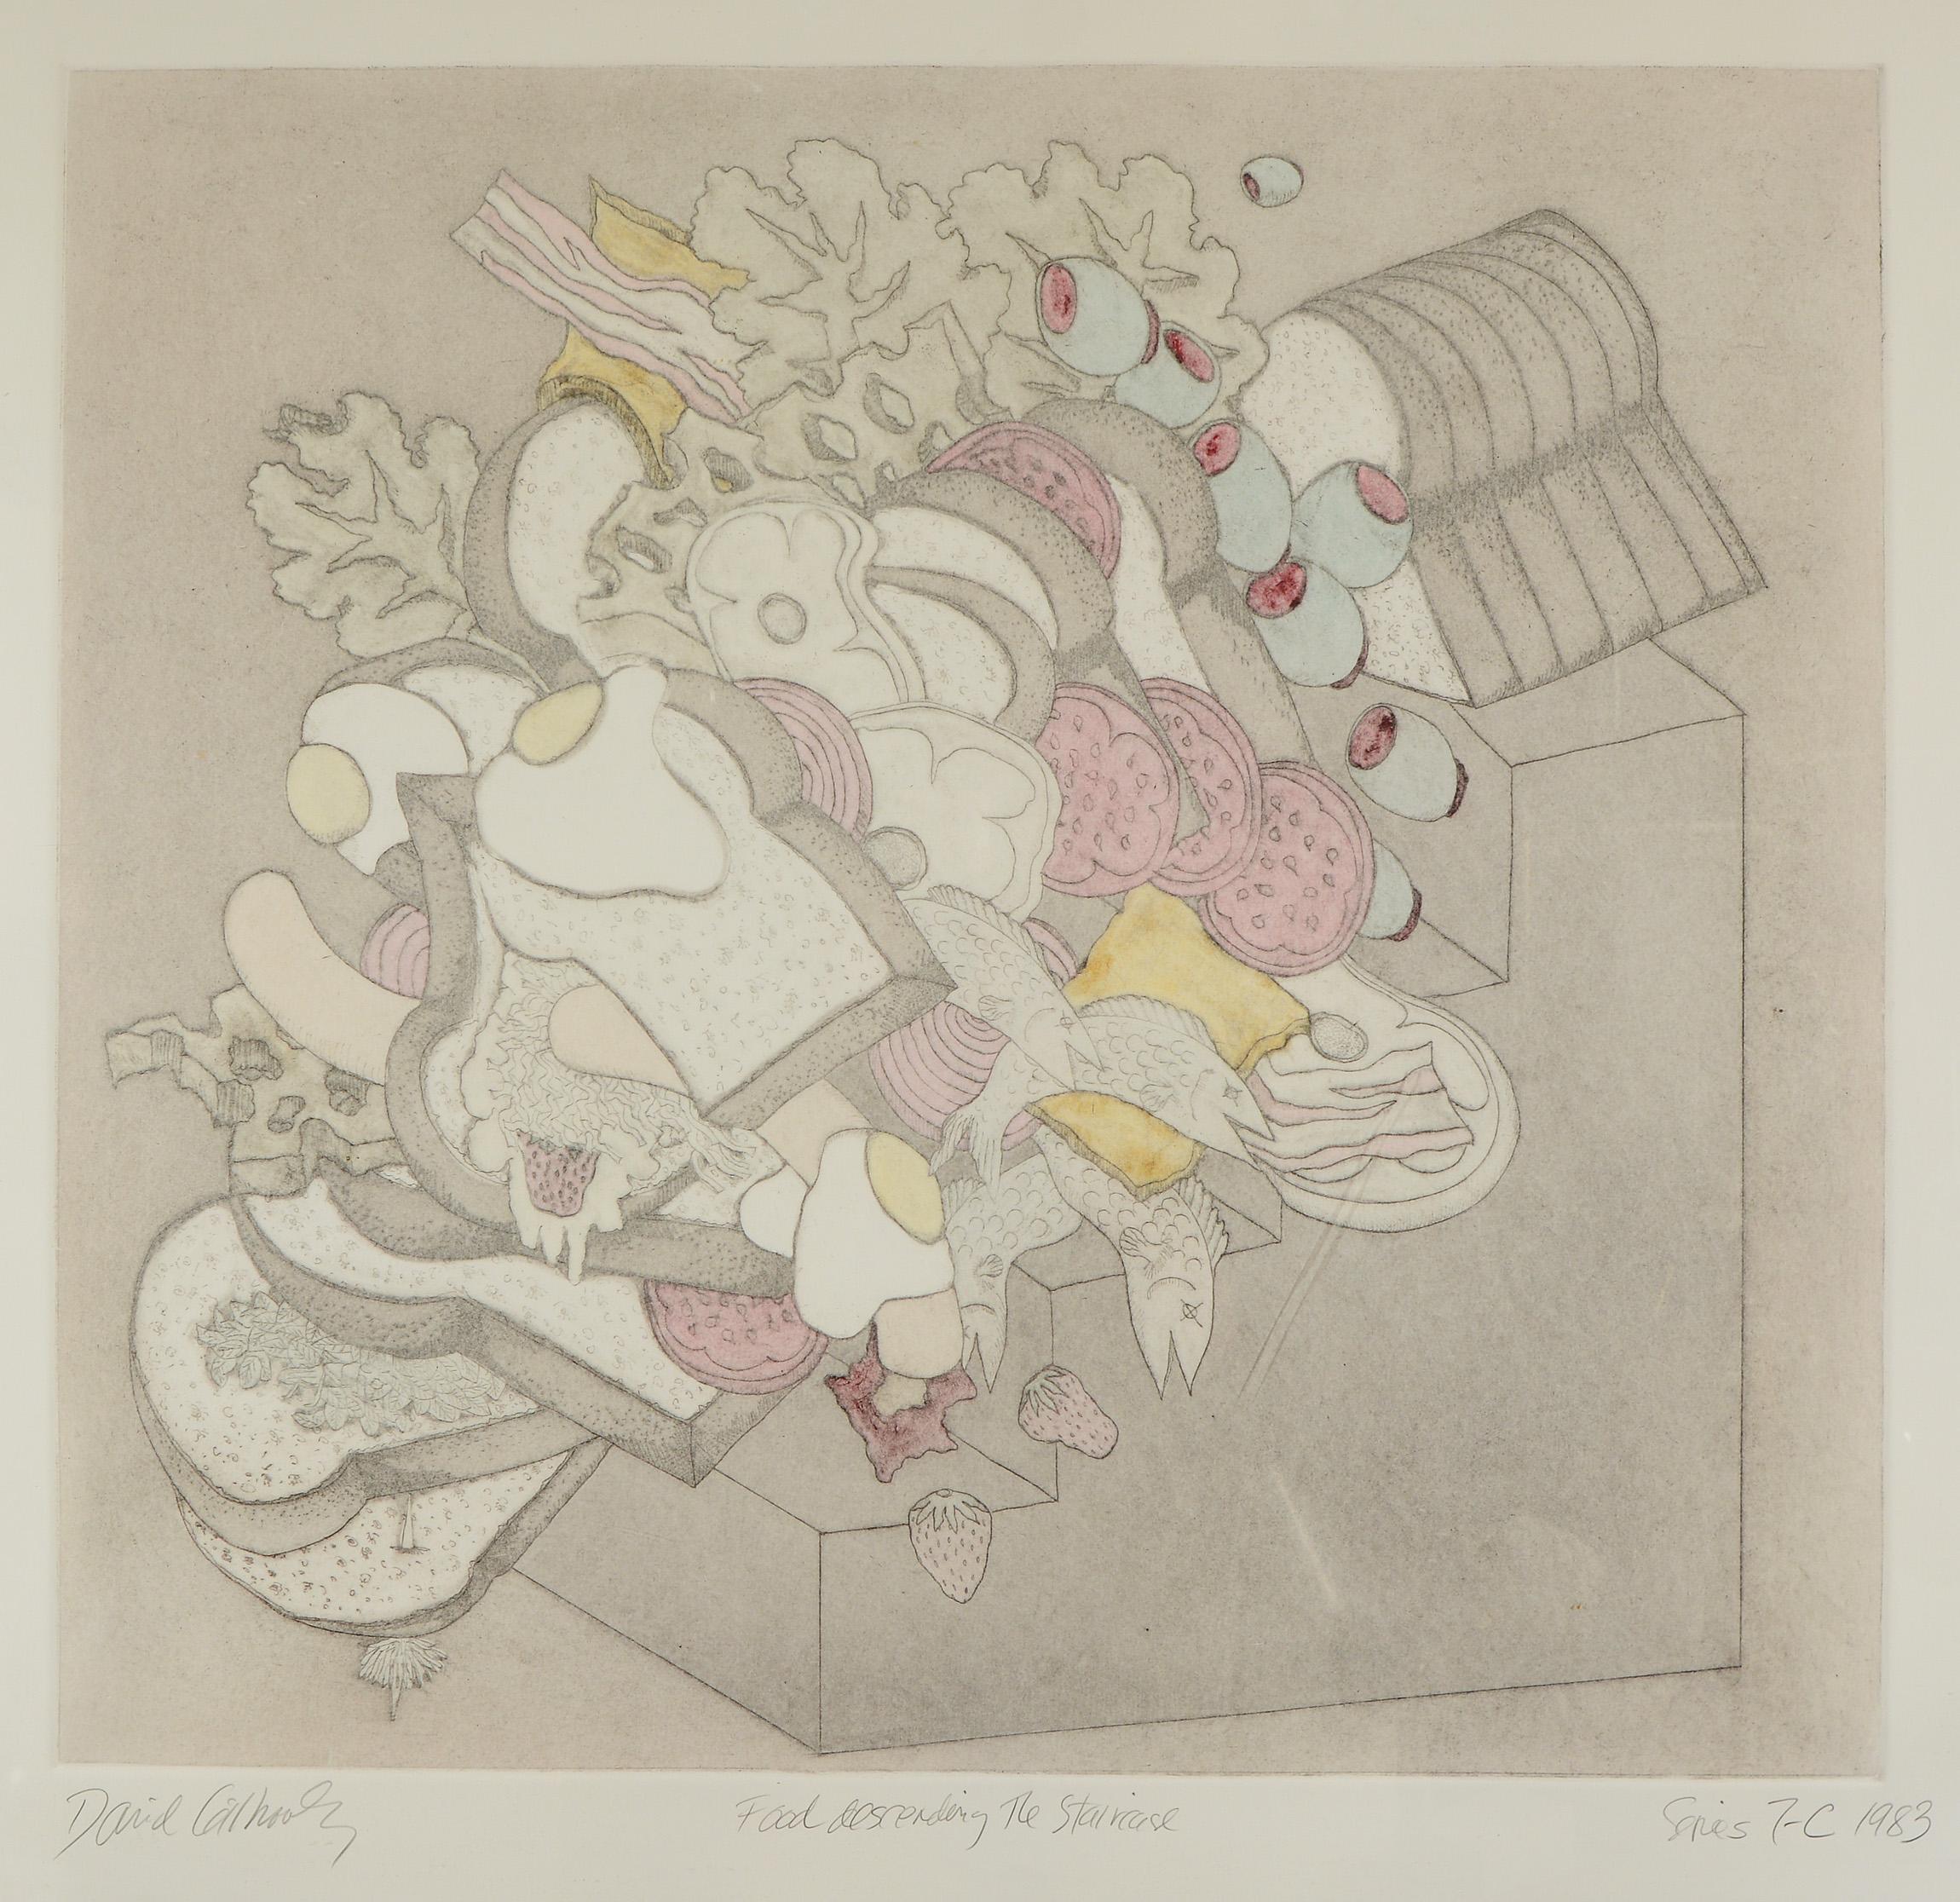 Hand colored print titled Food Descending the Staircase by David Gilhooly (1943-2013). The print is dated 1983 and was published by 3EP Ltd. This was probably framed at the time the print was made. It has not been examined out of the frame. Print